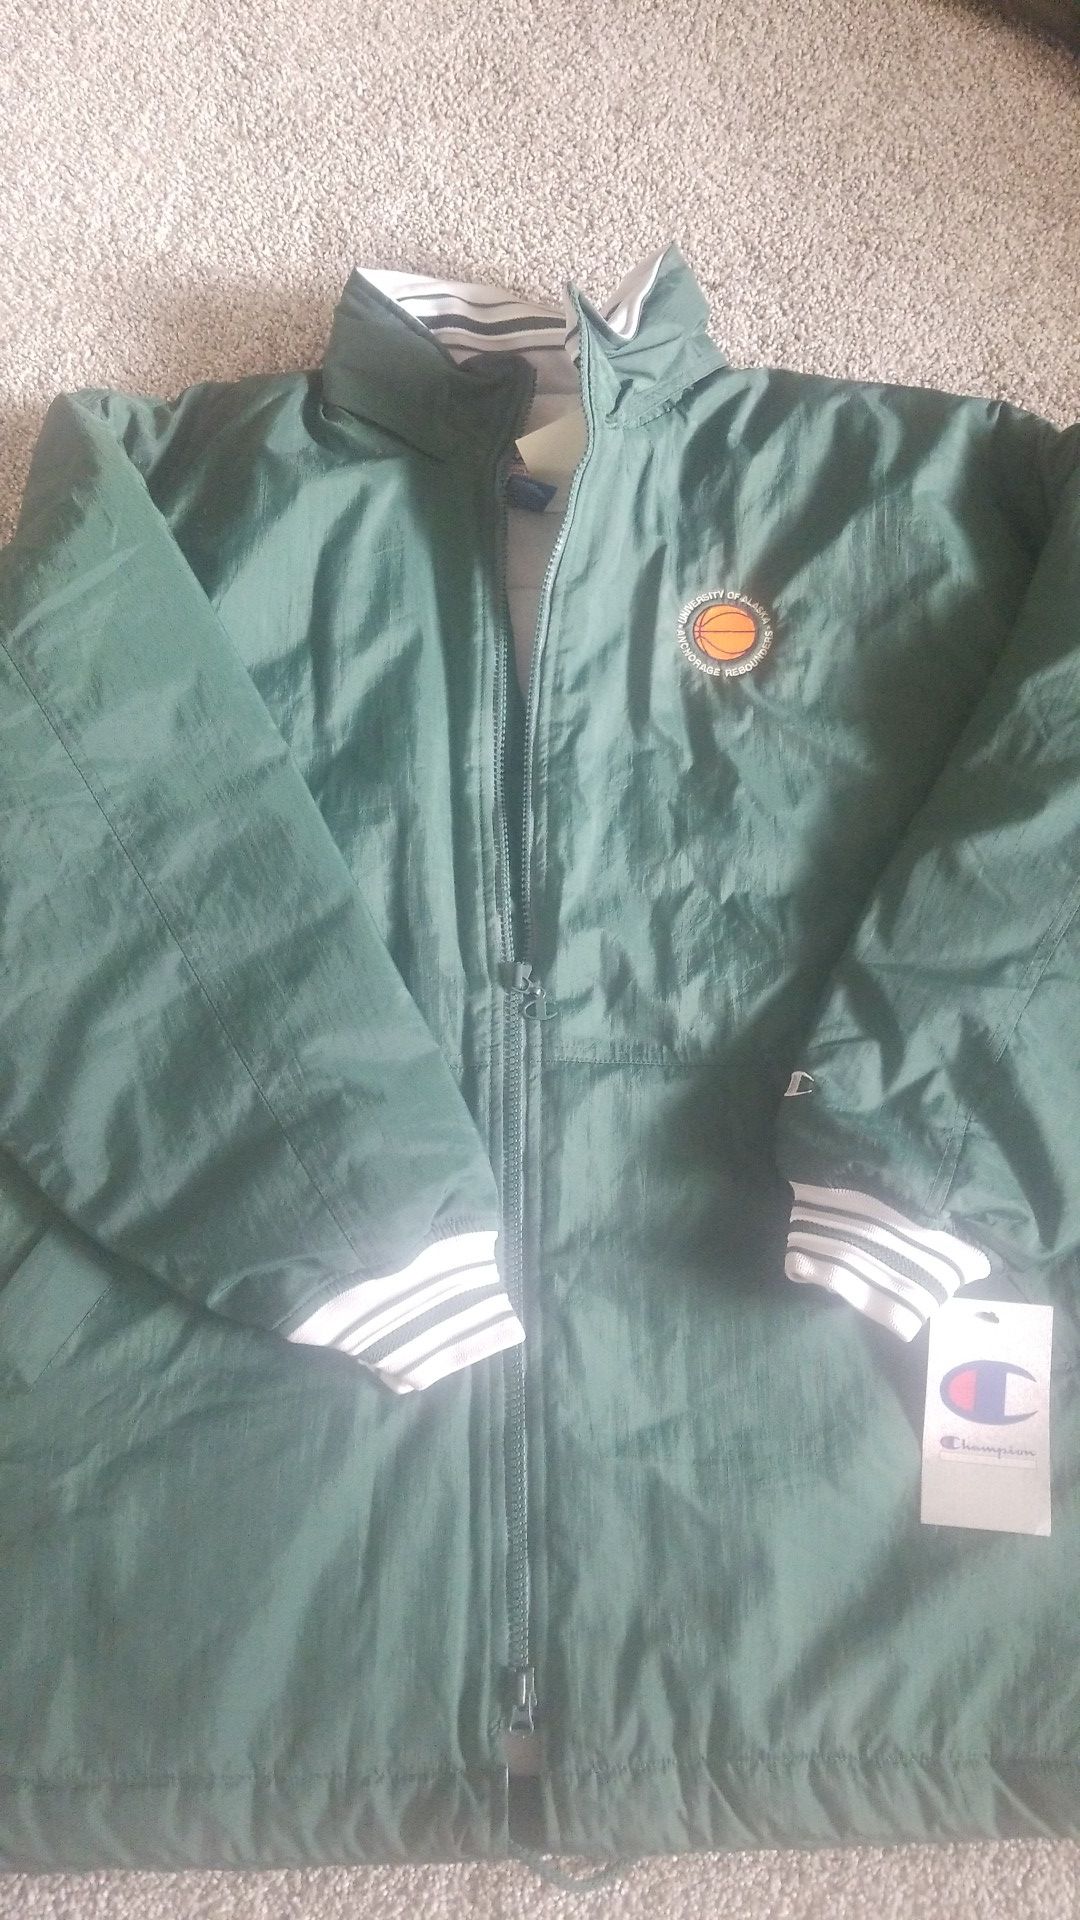 Official UAA champion jacket XL